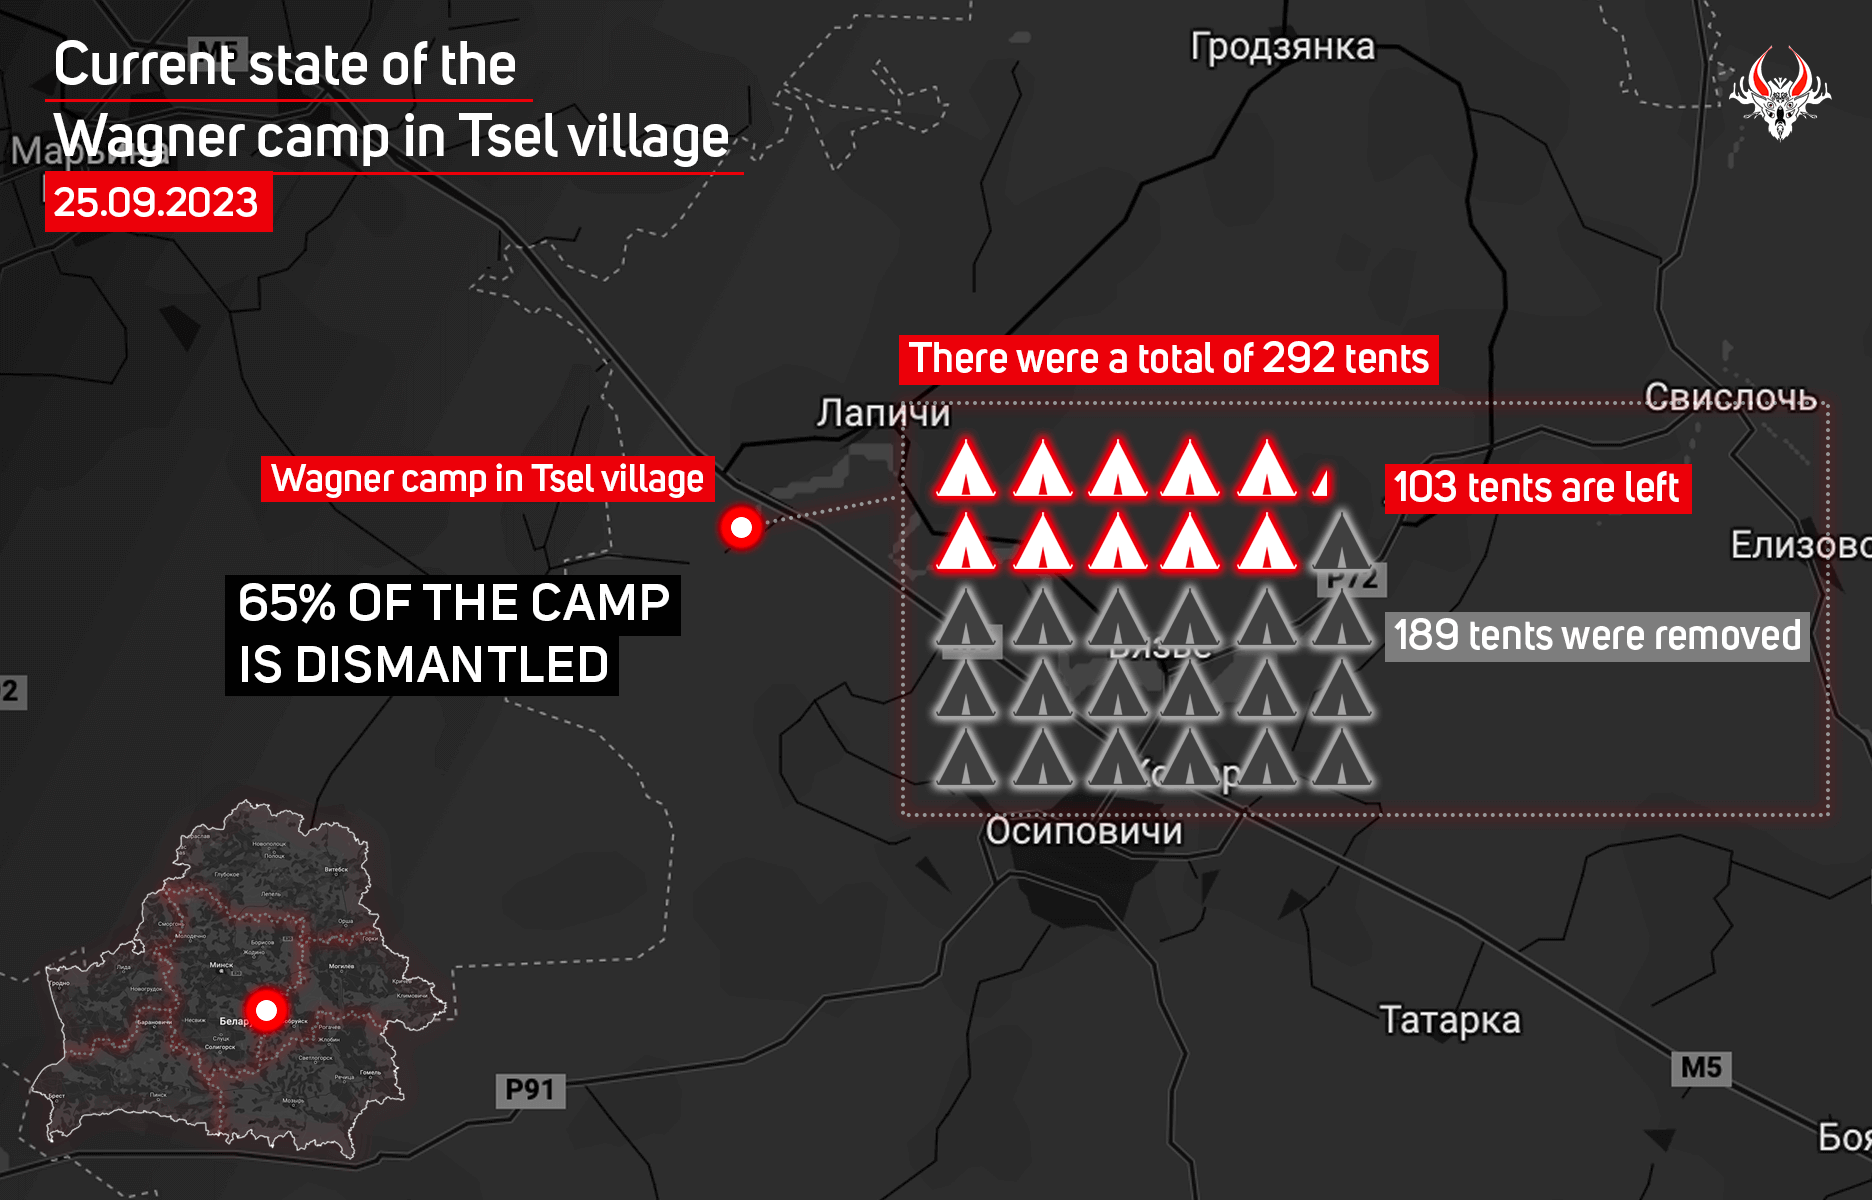 Dismantling of the field camp of PMC Wagner in Tsel village: current status